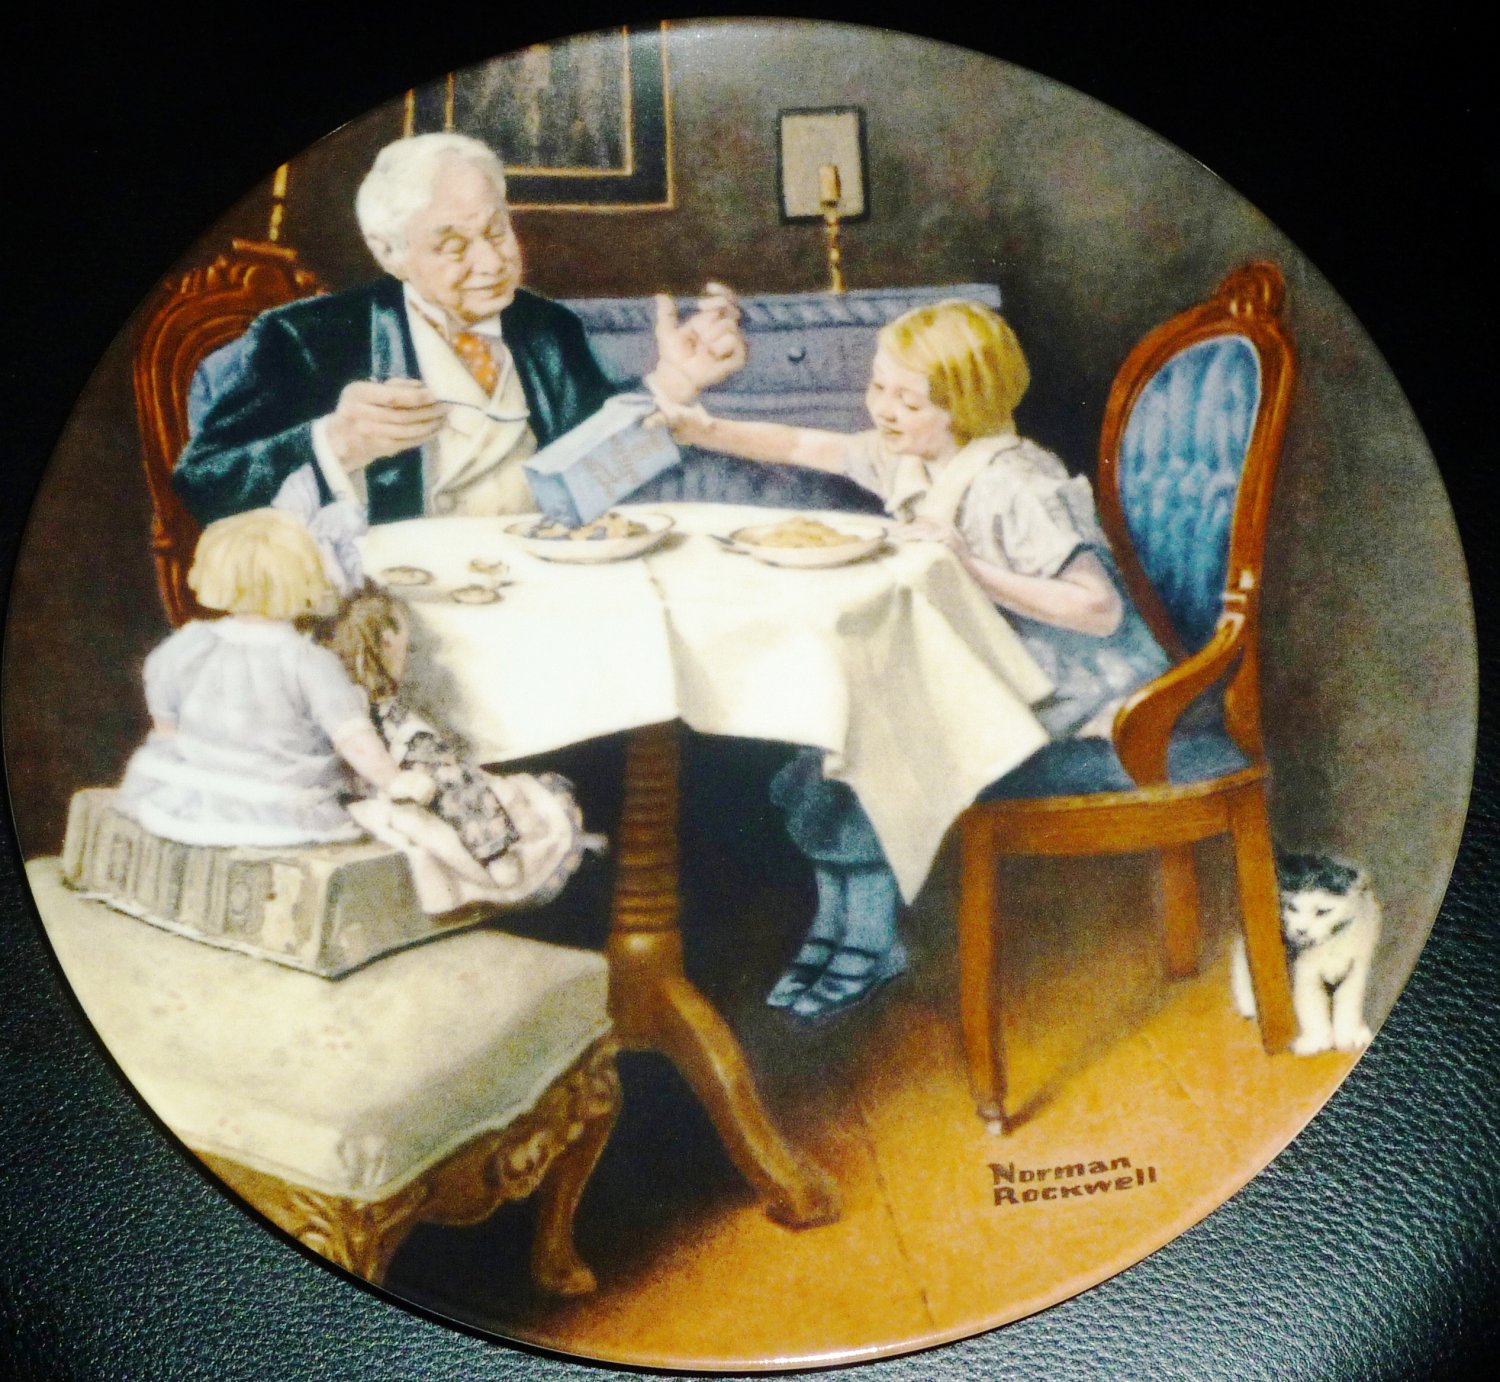 KNOWLES NORMAN ROCKWELL COLLECTOR PLATE 'THE GOURMET' ROCKWELL CLASSIC